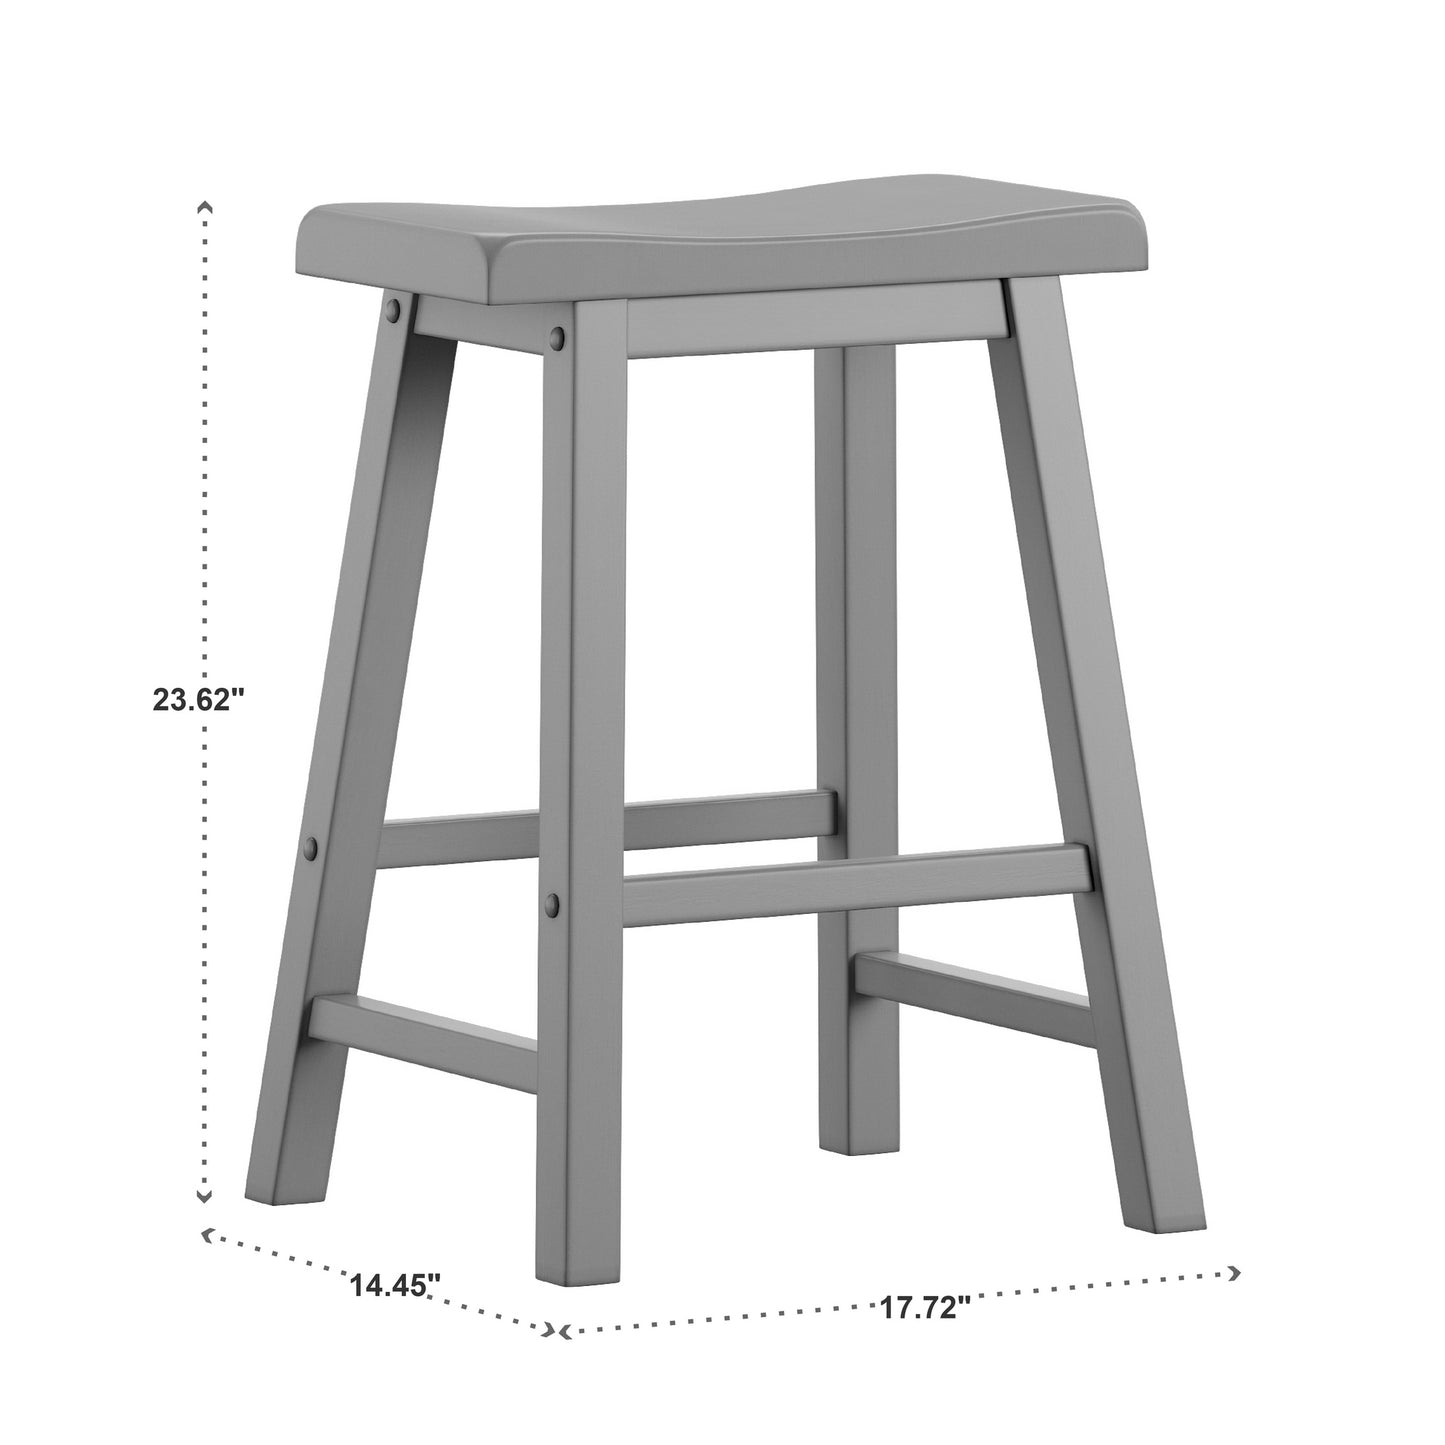 Saddle Seat Counter Height Backless Stools (Set of 2) - Frost Grey Finish